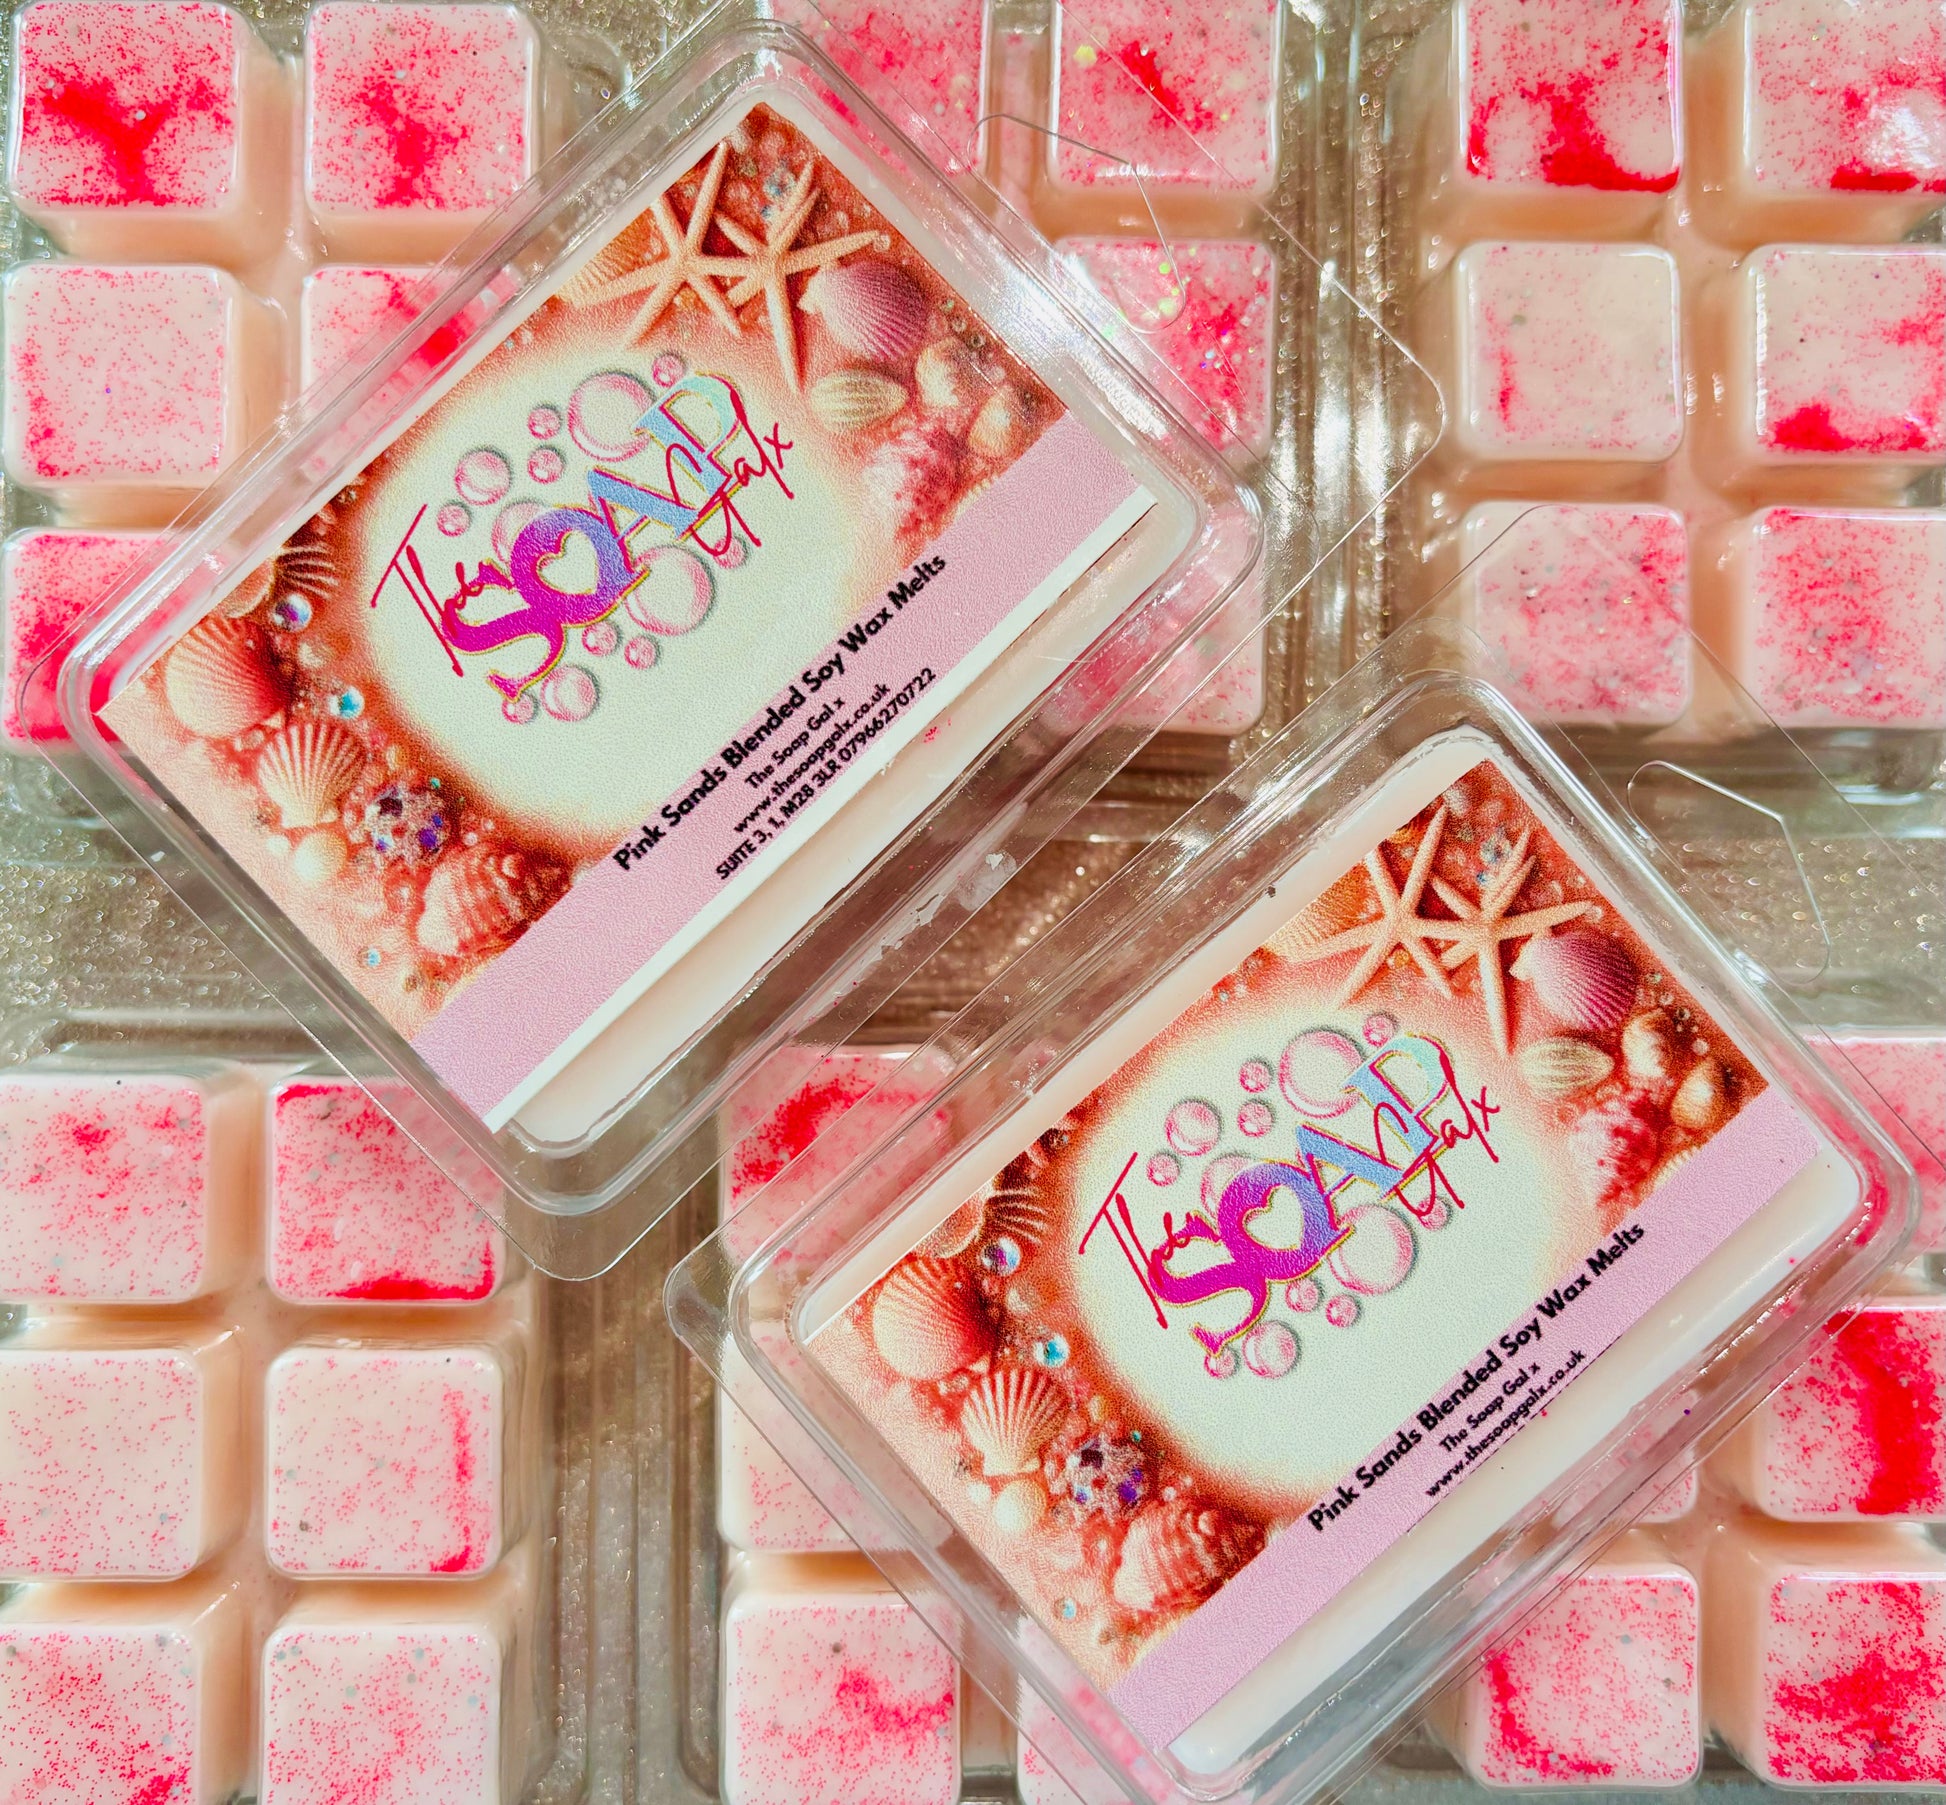 Colorful eyeshadow palettes with ocean-themed decoration displayed on a background of pink and white square textures, reminiscent of The Soap Gals Pink Sands Wax Melt Snap Bar.